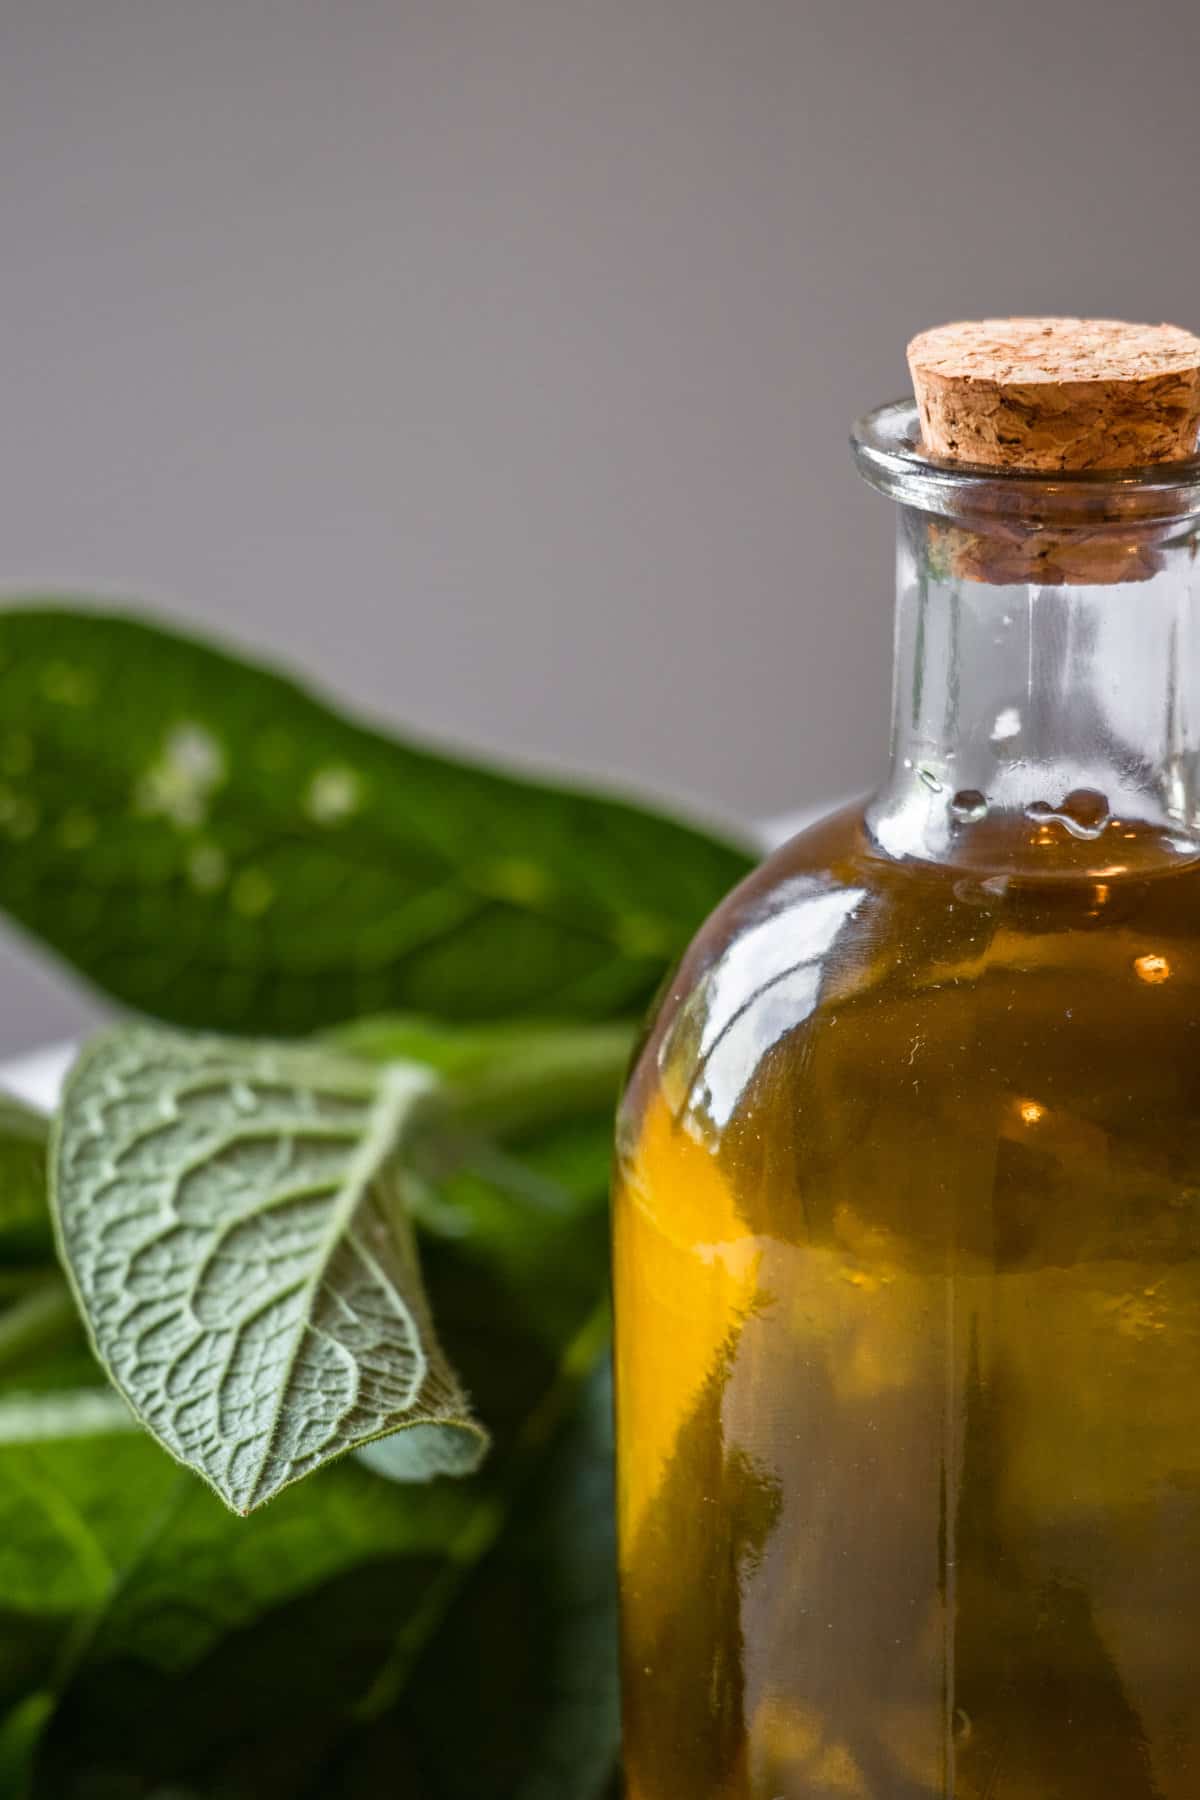 A bottle of homemade infused comfrey oil next to comfrey leaves